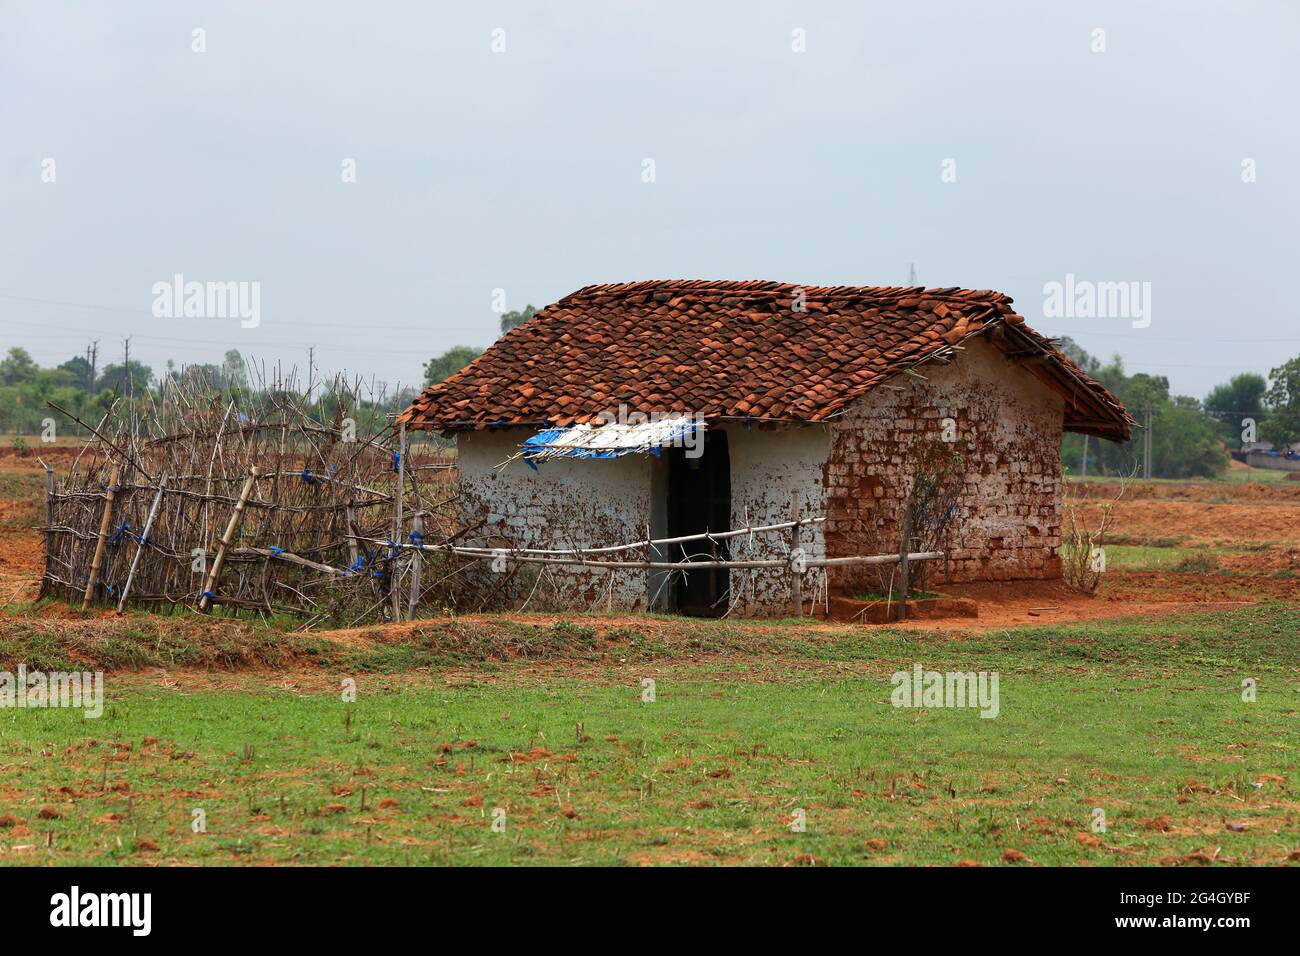 KOL TRIBE. Thatched house made of mud and Mangalore tiles Bhanpur Village of Huzur Tehsil in Rewa Dist, Madhya Pradesh, India Stock Photo